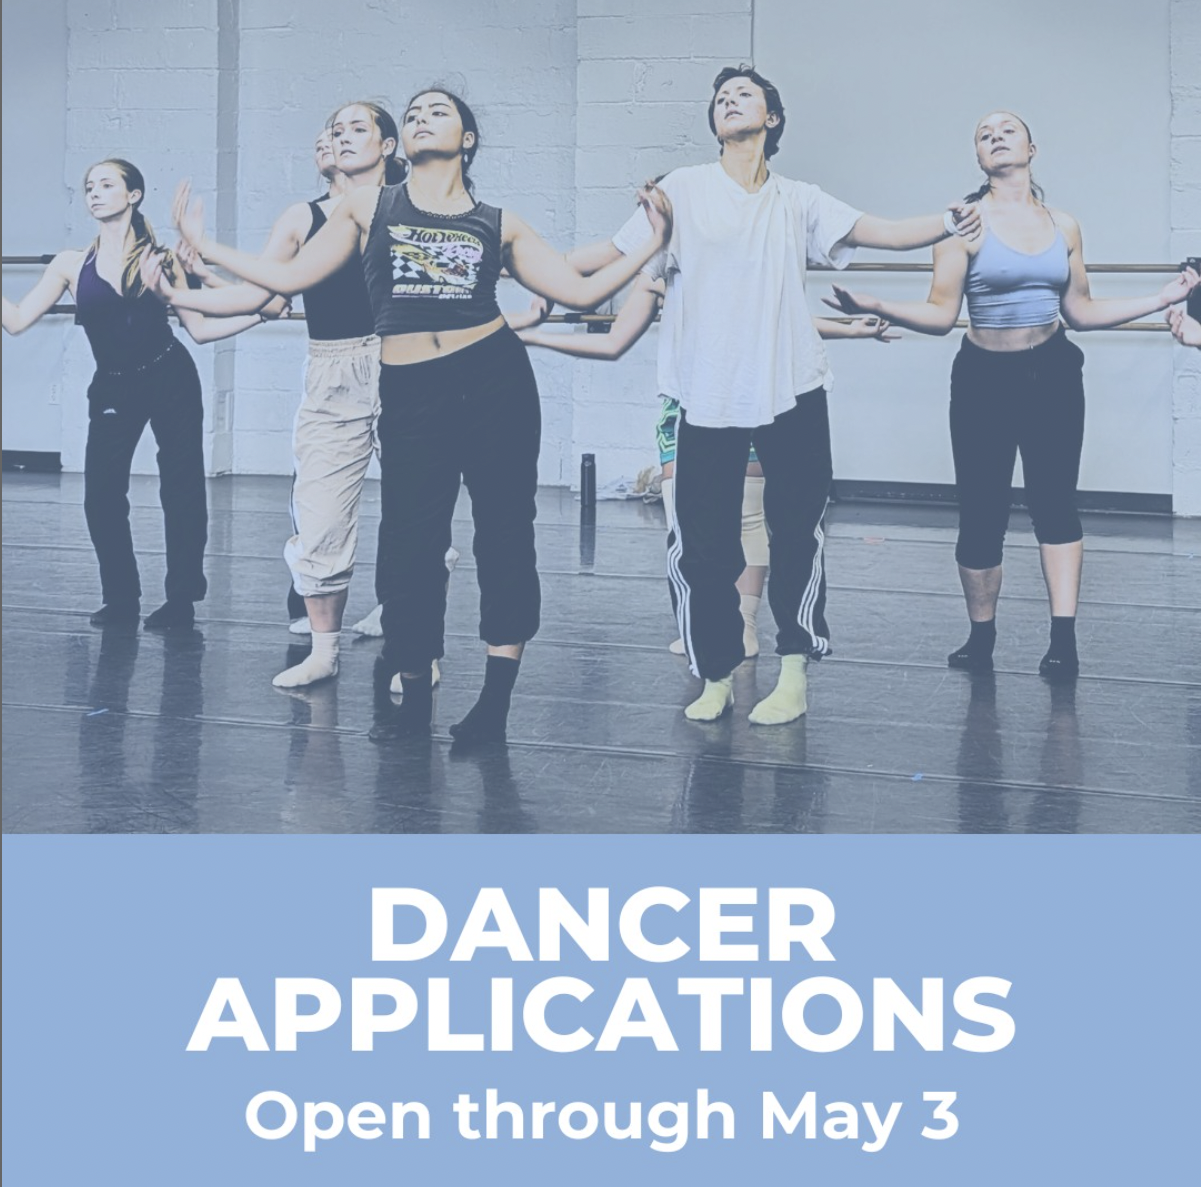 "Dancer applications open through May 3" written at the bottom of a photo of dancers in rehearsal